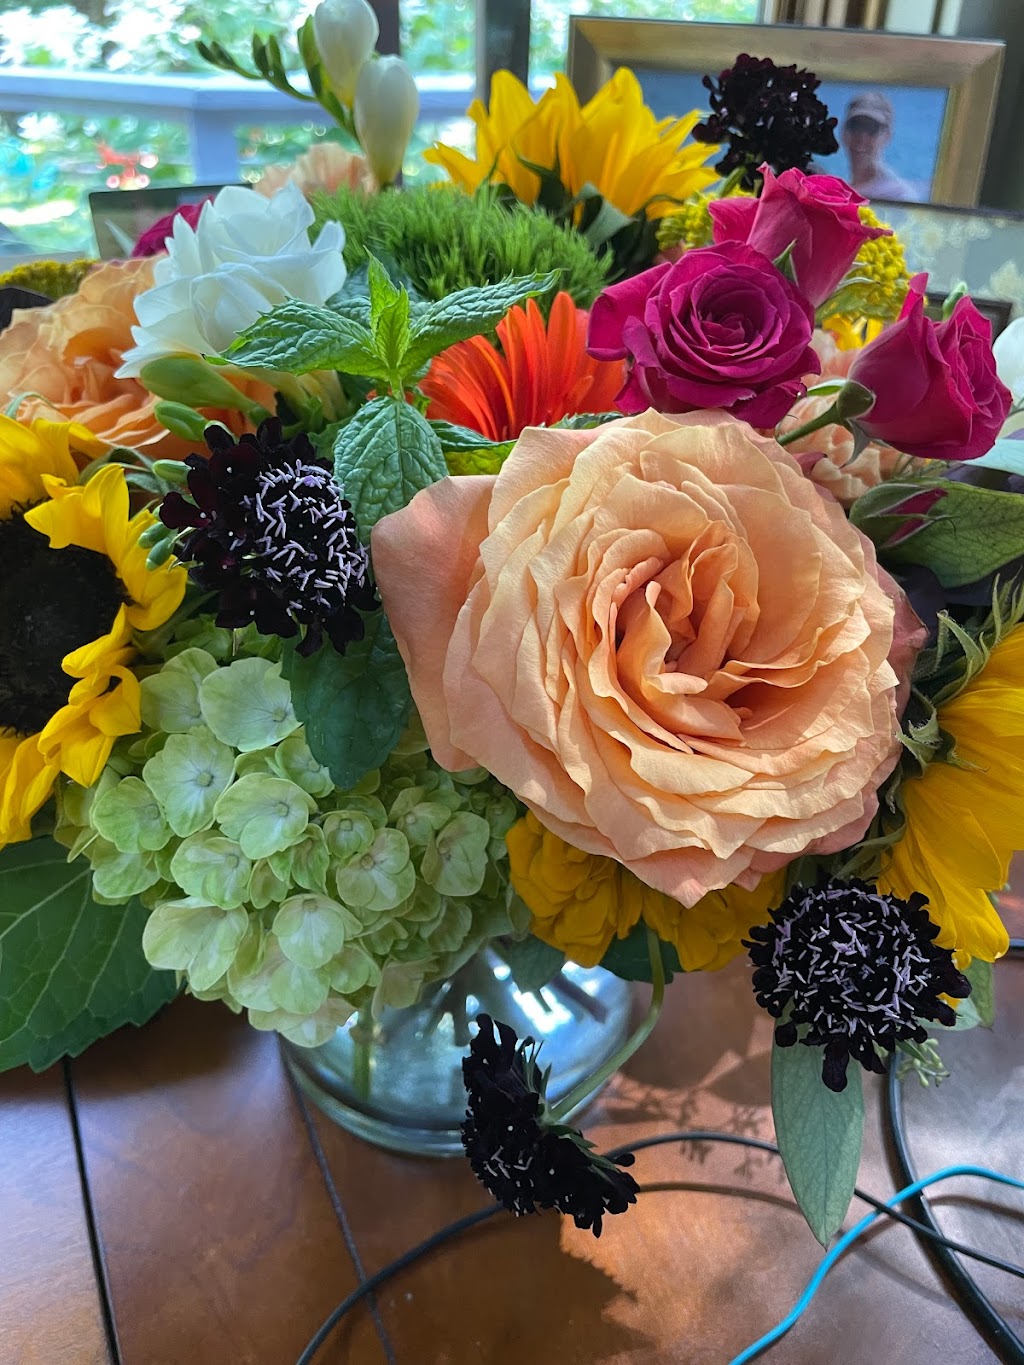 The Local Flower Market | 7217 Albany Post Rd, Rhinebeck, NY 12572 | Phone: (845) 758-3569